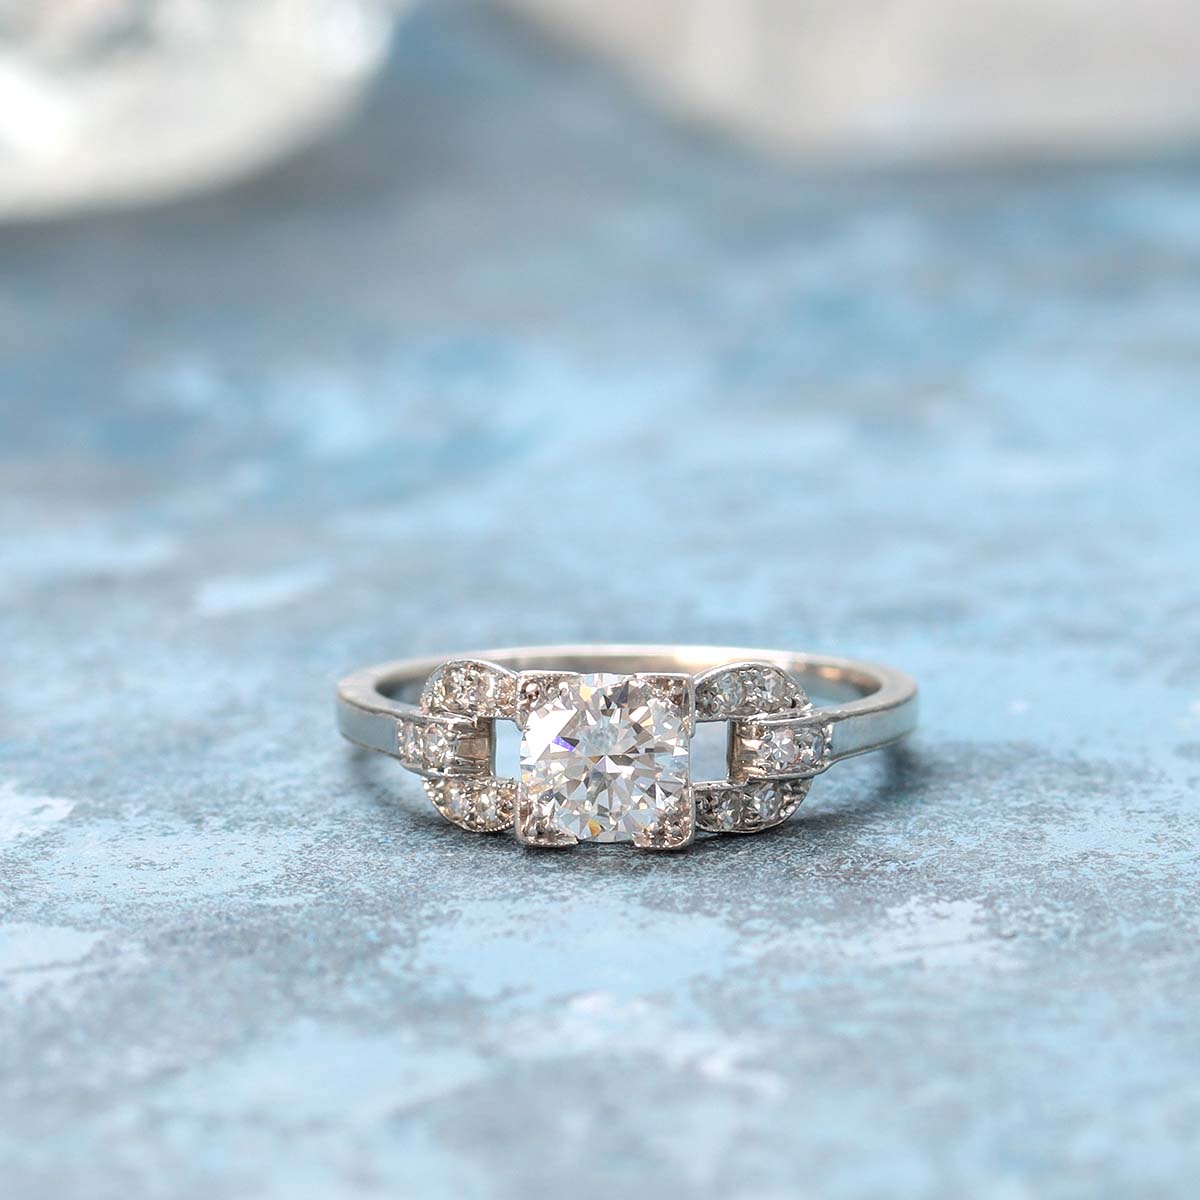 Circa 1930s Diamond Engagement ring. #VR868 – Leigh Jay & Co